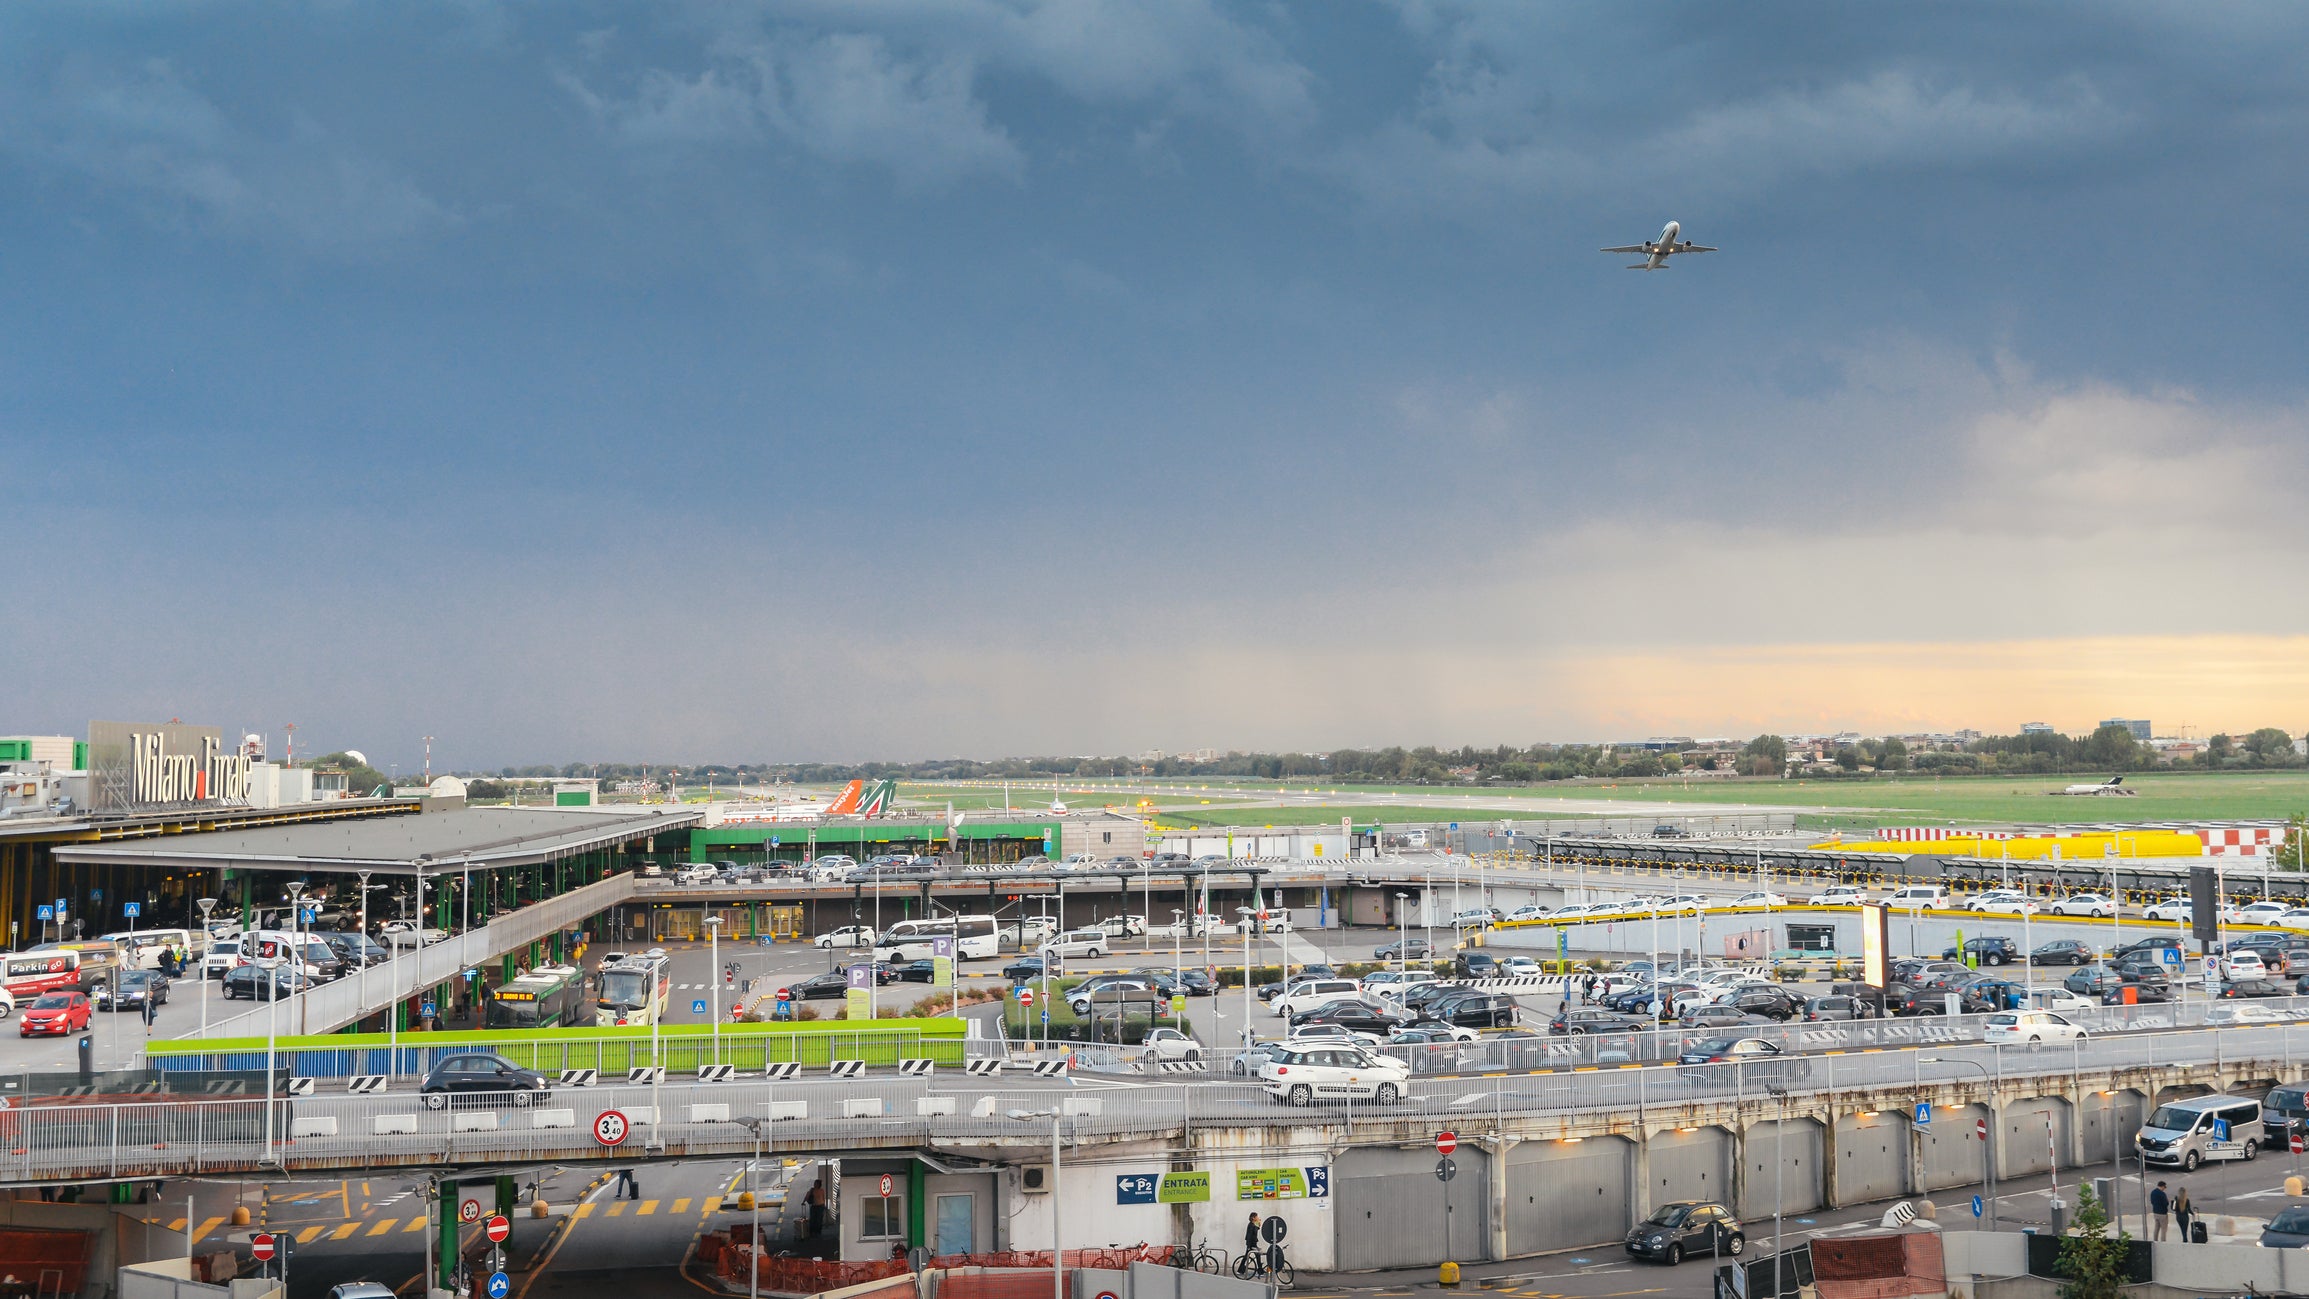 Milan Linate Airport is the hub for Alitalia, Italy's national carrier